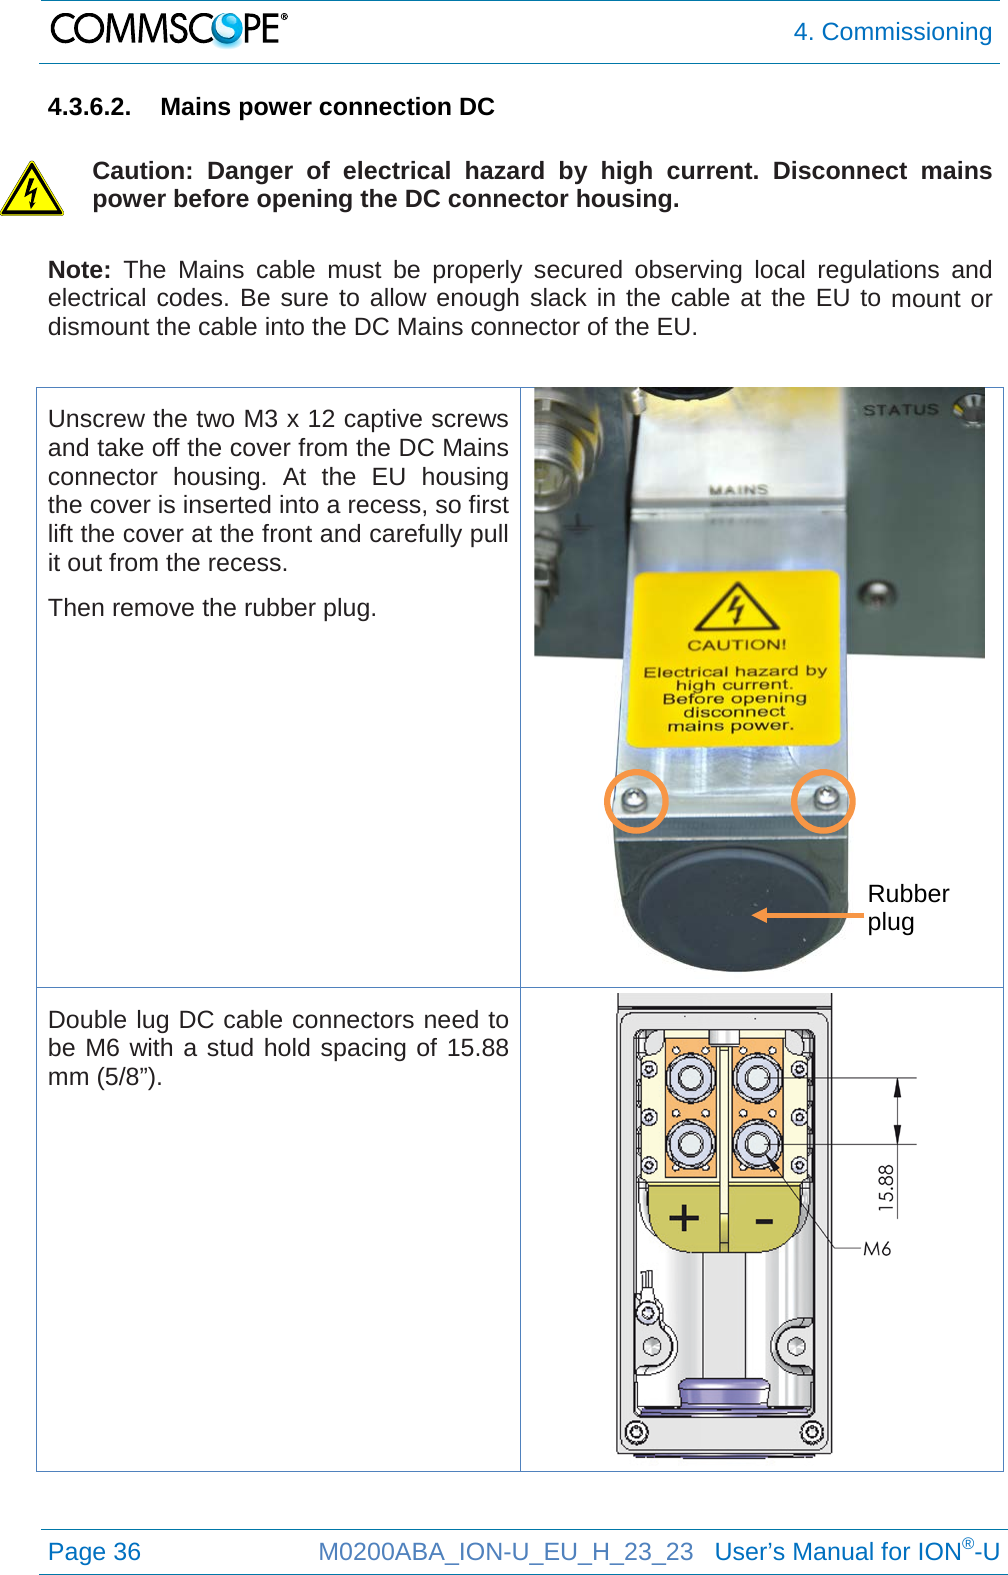  4. Commissioning  Page 36 M0200ABA_ION-U_EU_H_23_23   User’s Manual for ION®-U  4.3.6.2. Mains power connection DC  Caution: Danger of electrical hazard by high current.  Disconnect mains power before opening the DC connector housing. Note: The Mains cable must be properly secured observing local regulations and electrical codes. Be sure to allow enough slack in the cable at the EU to mount or dismount the cable into the DC Mains connector of the EU.  Unscrew the two M3 x 12 captive screws and take off the cover from the DC Mains connector housing. At the EU housing the cover is inserted into a recess, so first lift the cover at the front and carefully pull it out from the recess. Then remove the rubber plug.  Double lug DC cable connectors need to be M6 with a stud hold spacing of 15.88 mm (5/8”).     Rubber plug 